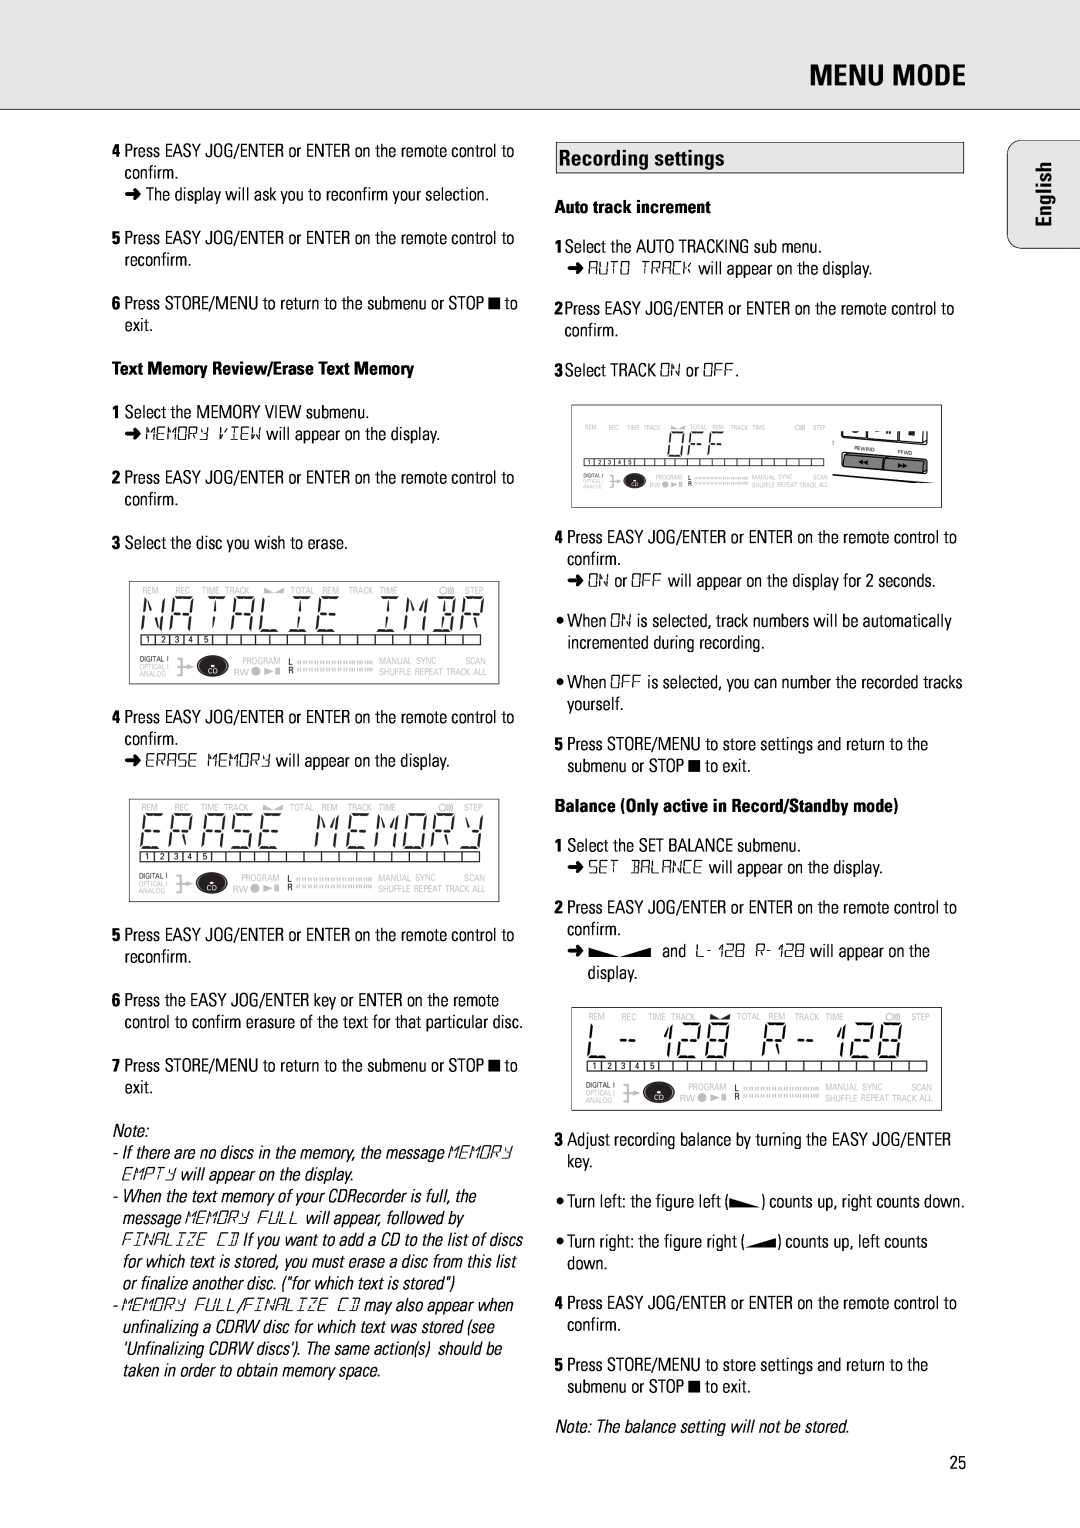 Philips CDR570 manual Recording settings, Text Memory Review/Erase Text Memory, Auto track increment, Menu Mode, English 